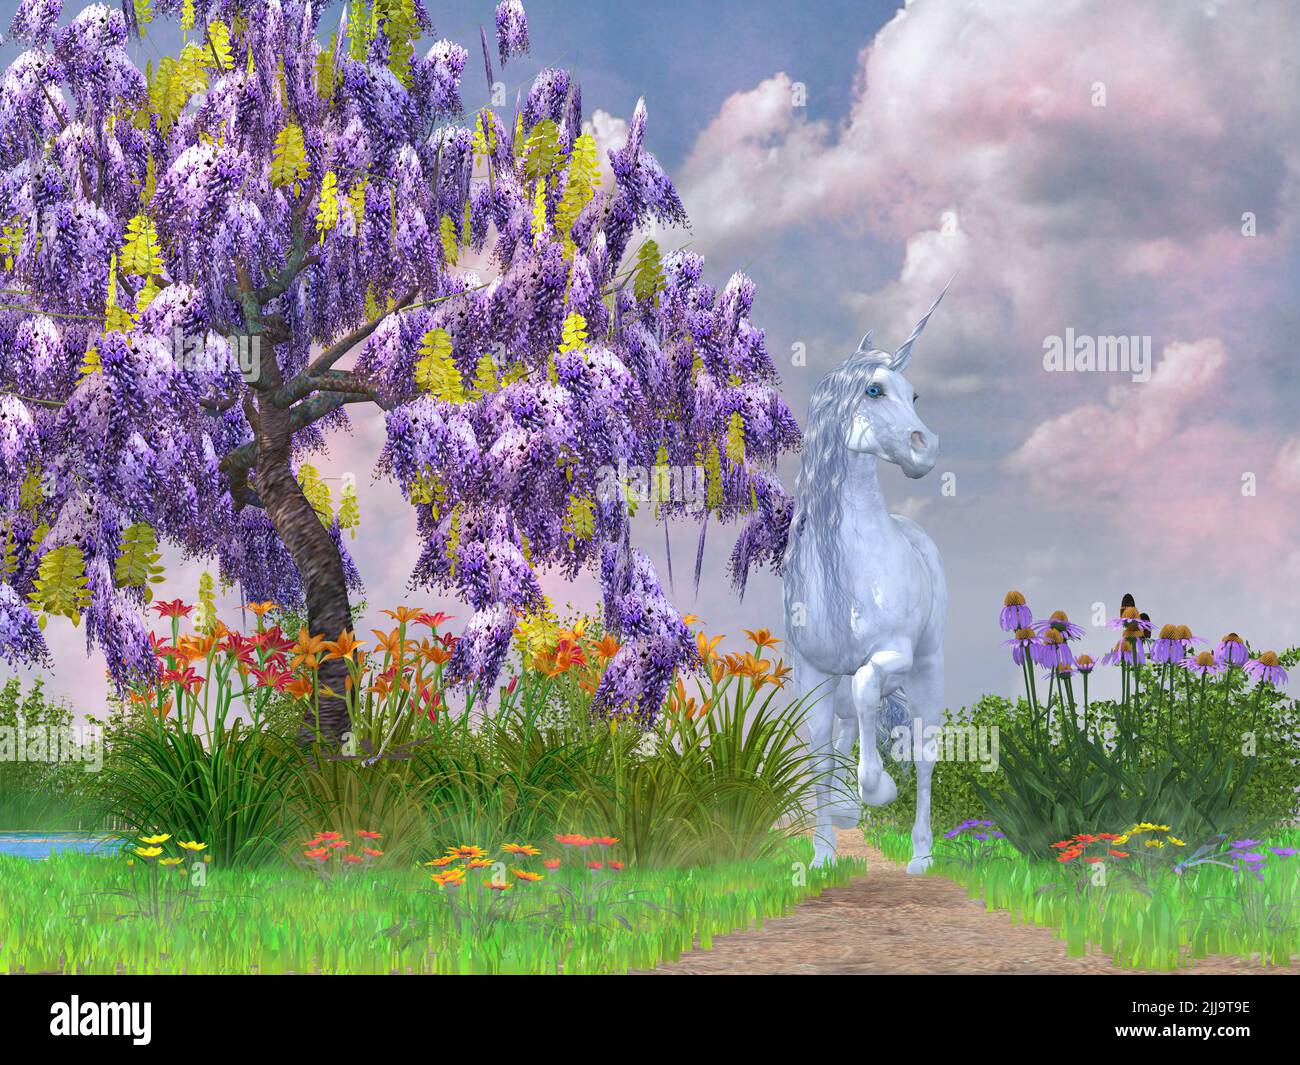 A legendary white Unicorn follows a path surrounded by flowers and a purple Wisteria tree. Stock Photo